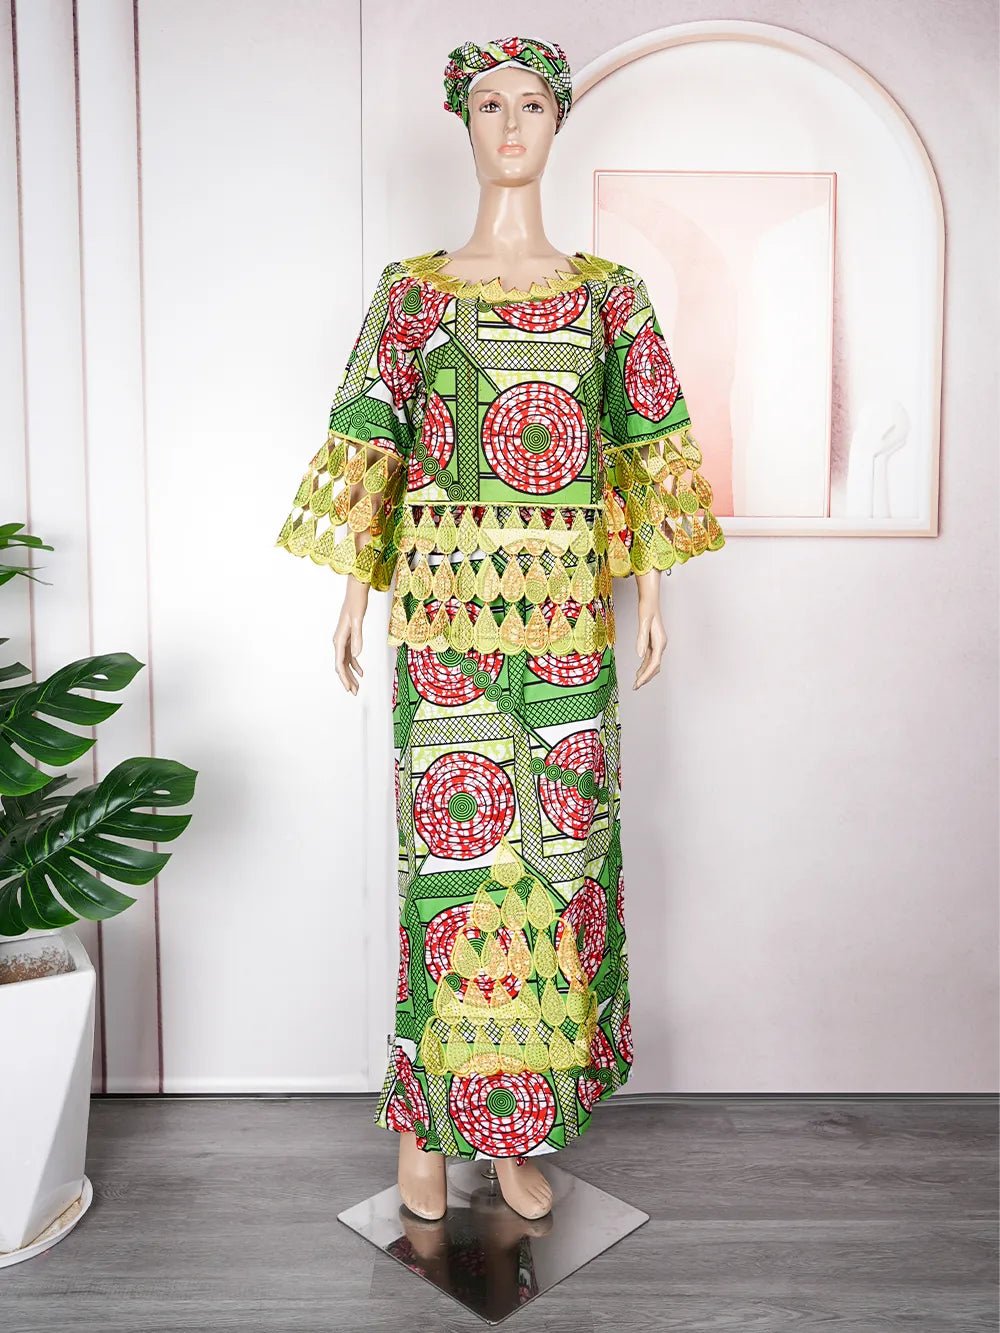 Traditional African Bazin Riche Dashiki Dress with Exquisite Embroidery Pattern for Women - Flexi Africa www.flexiafrica.com